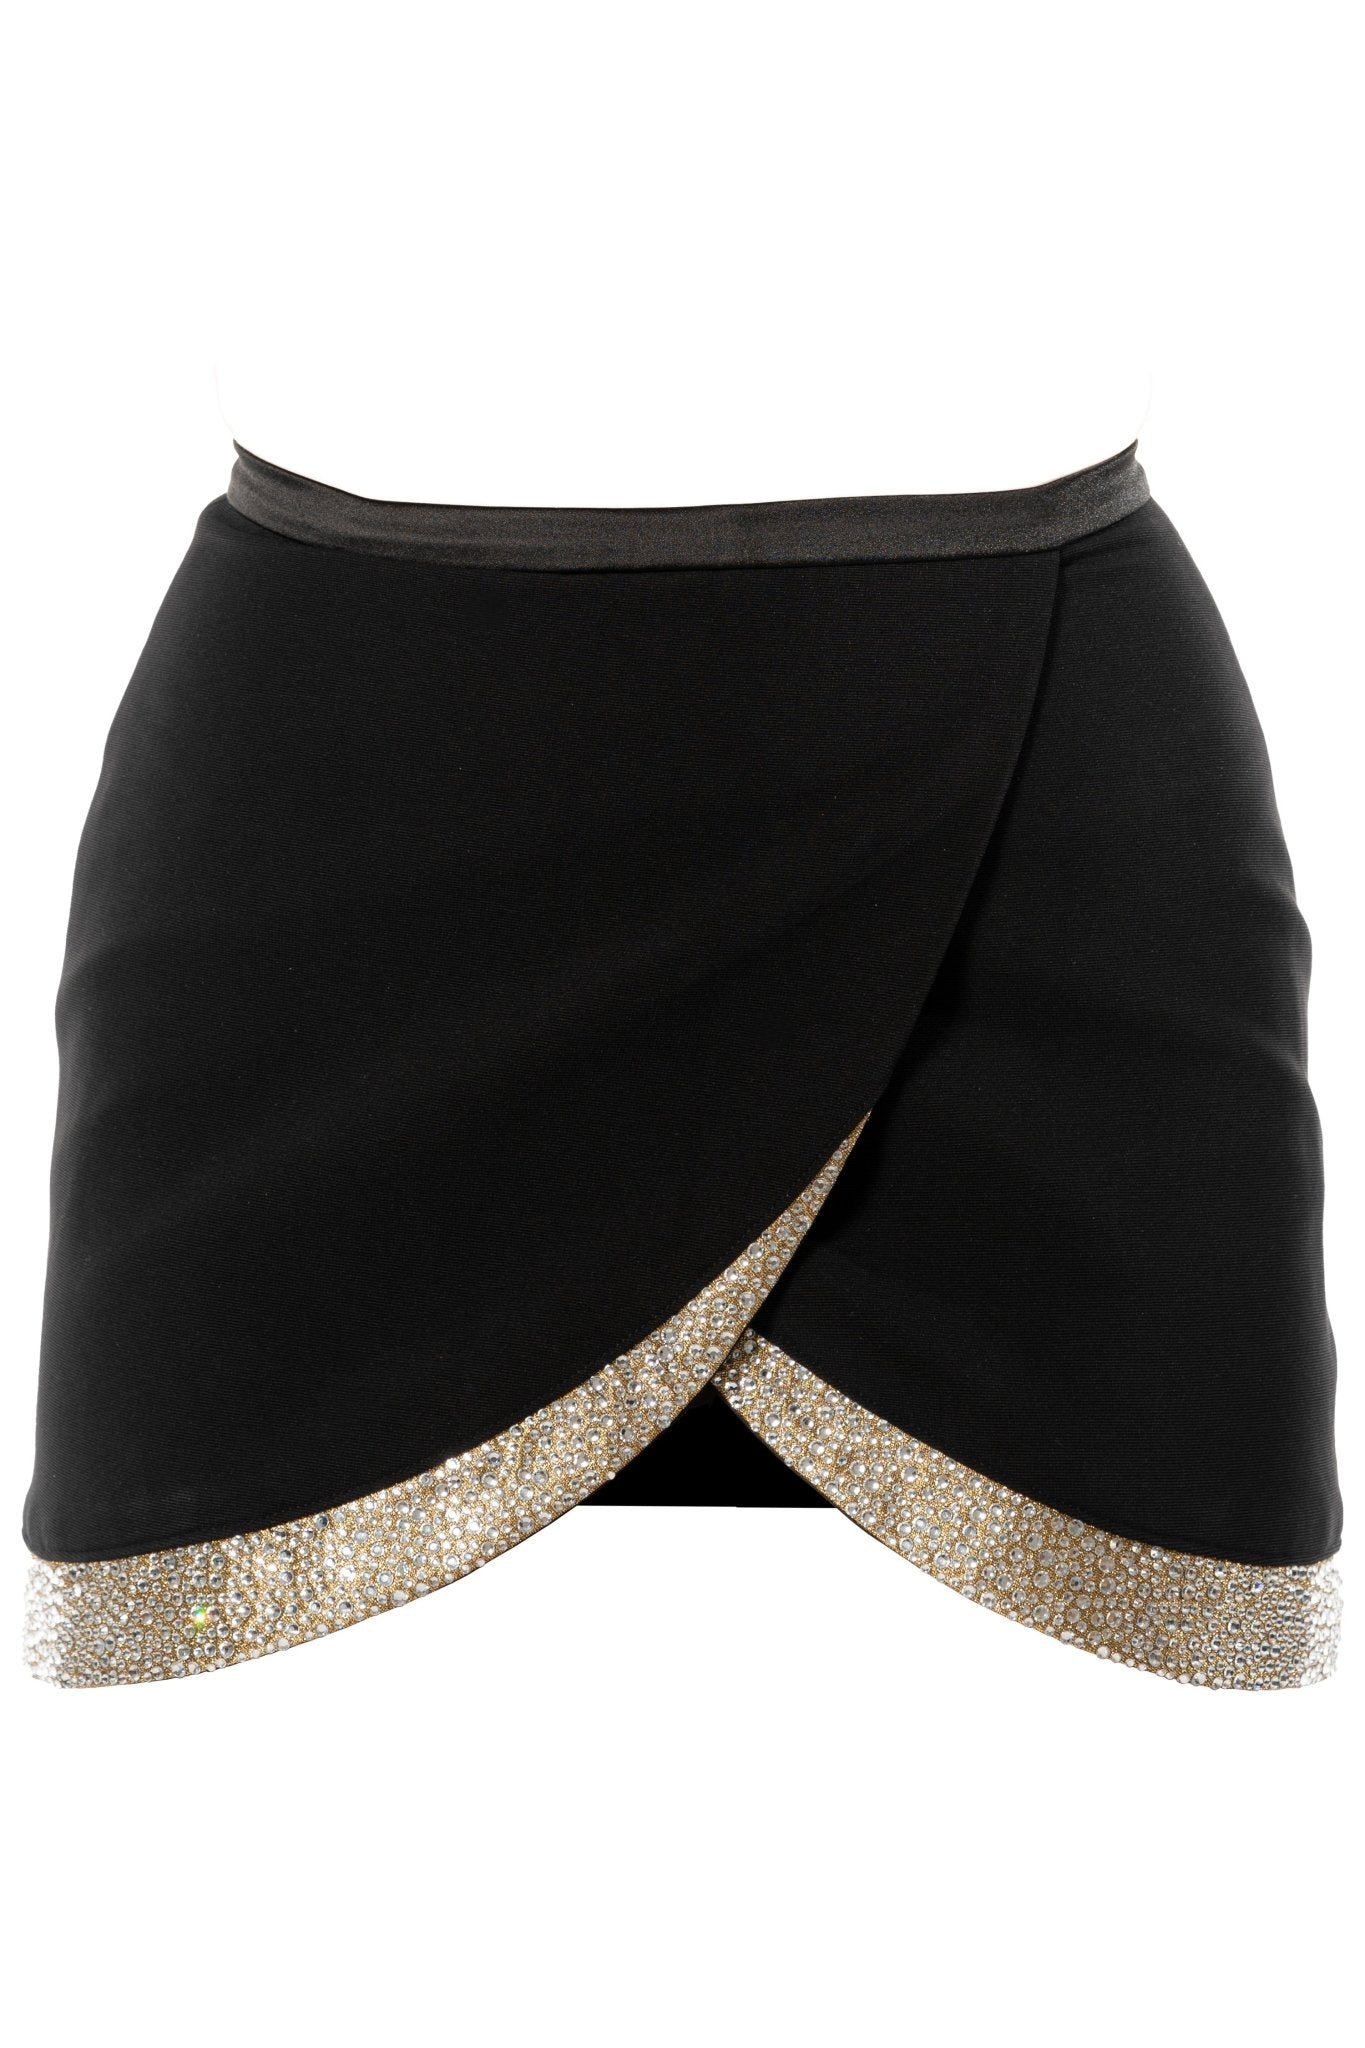 LYNN Cocktail Uniform Skirt for gaming, casino, hotel, restaurant, hospitality, and resorts. A short surplice skirt with gold brocade and crystal stone motif. - KAPTVA Apparel